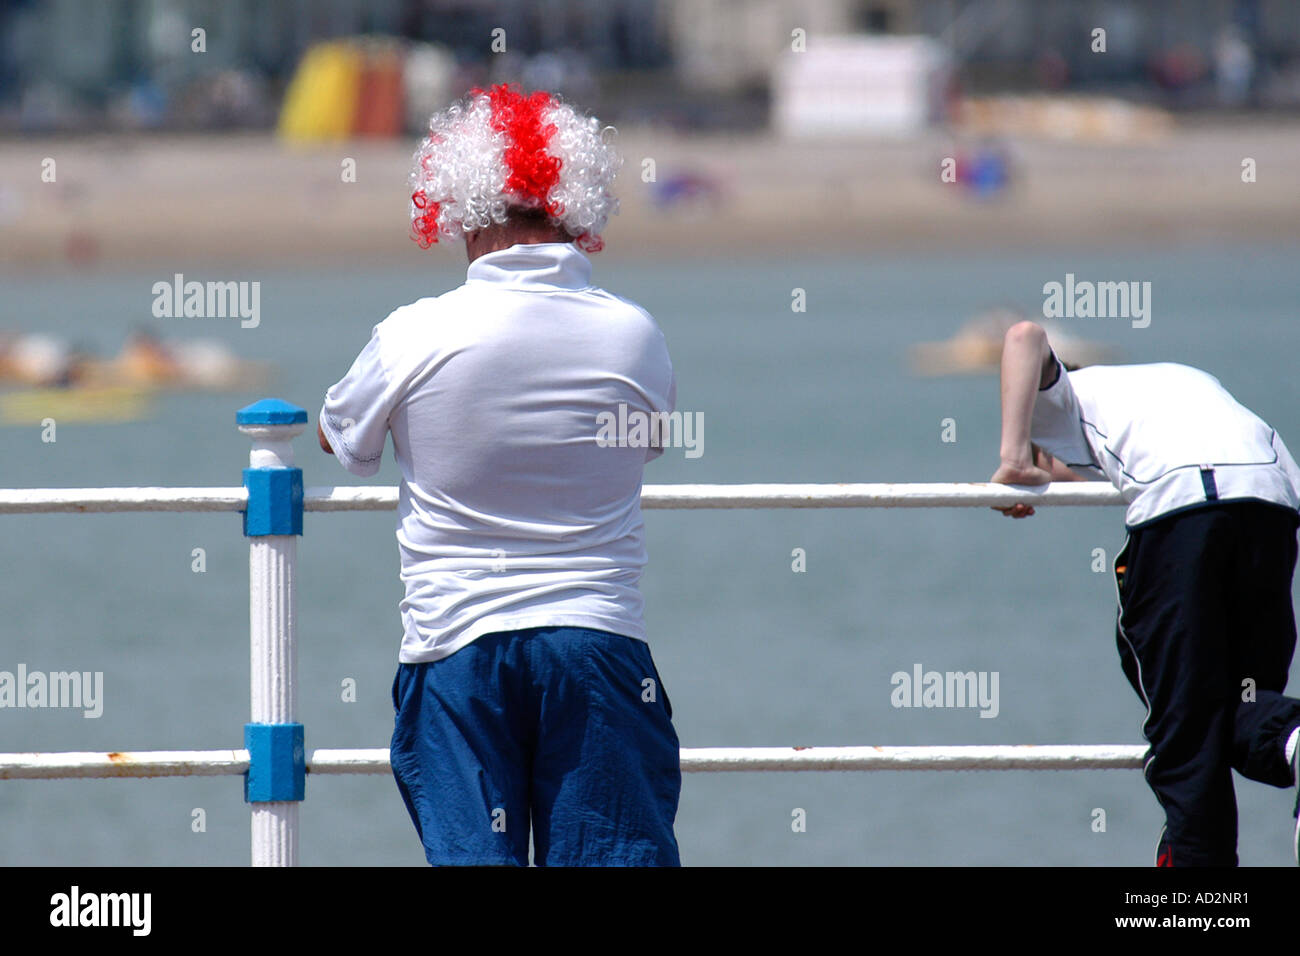 England Football supporter on vacation wearing a red and white wig. Stock Photo